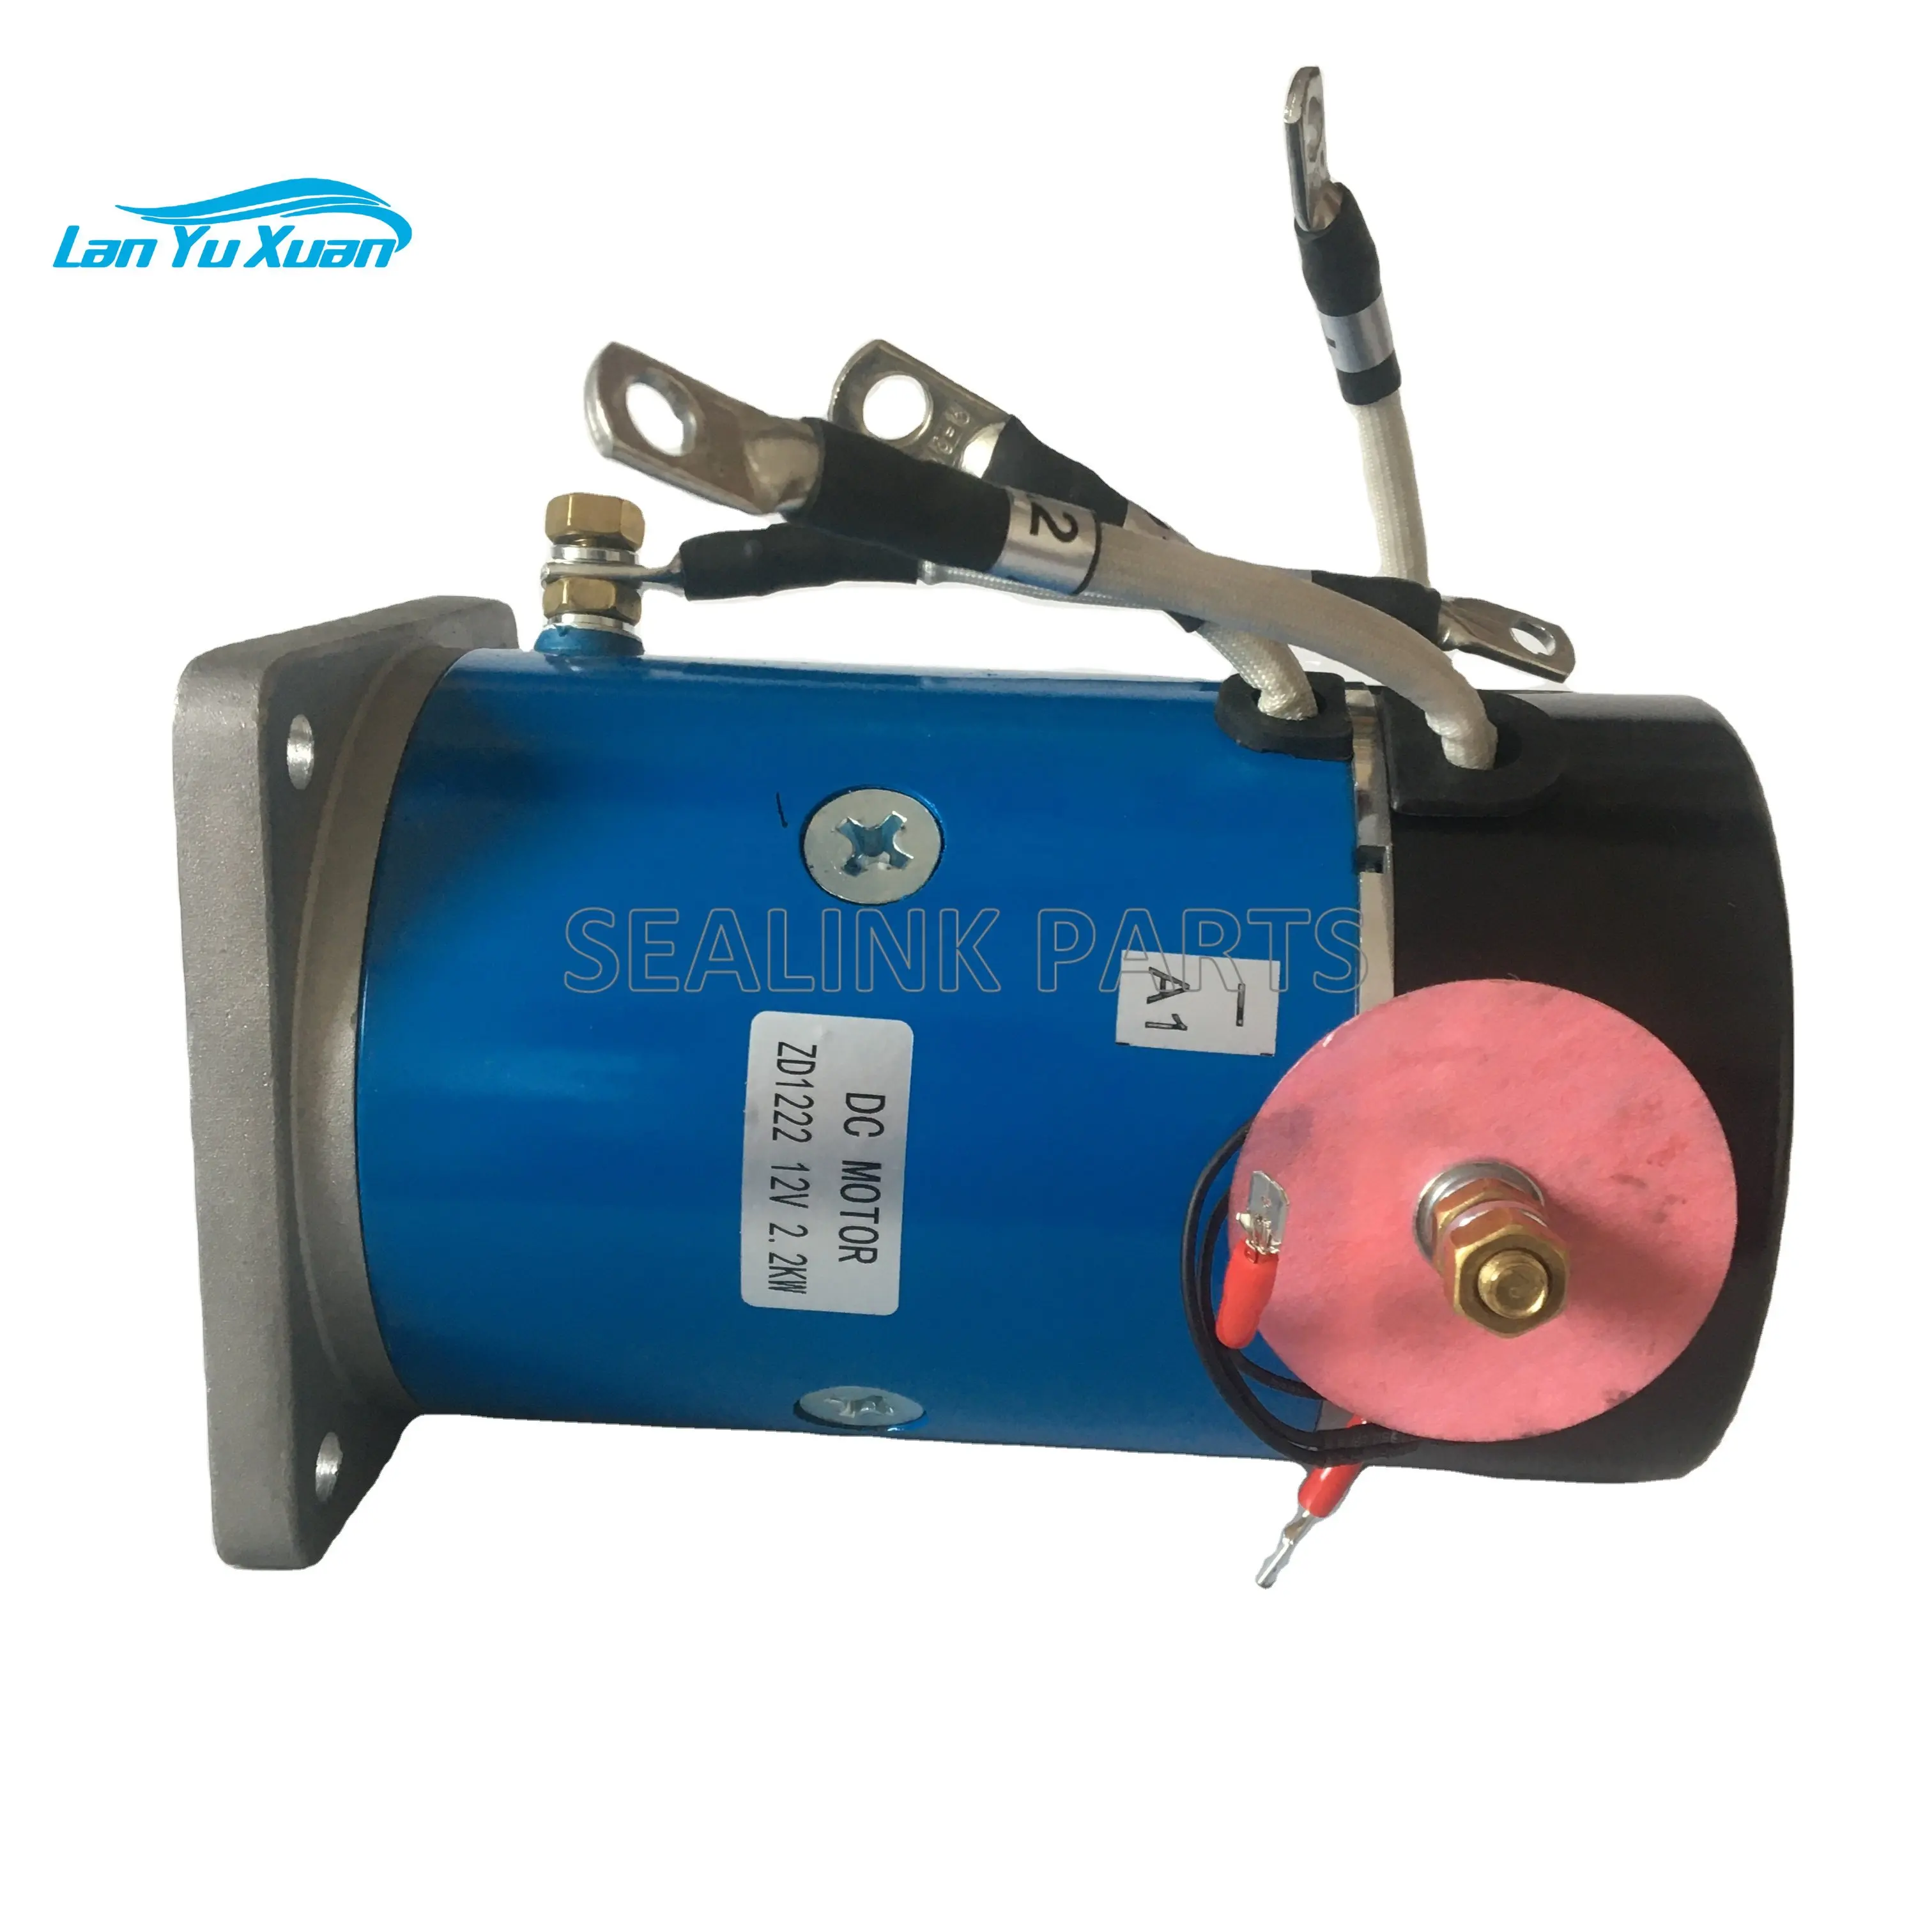 

DC Motor 12v 5500RPM for Lewmar 140TT 2.2KW Marine Electric Bow Thruster